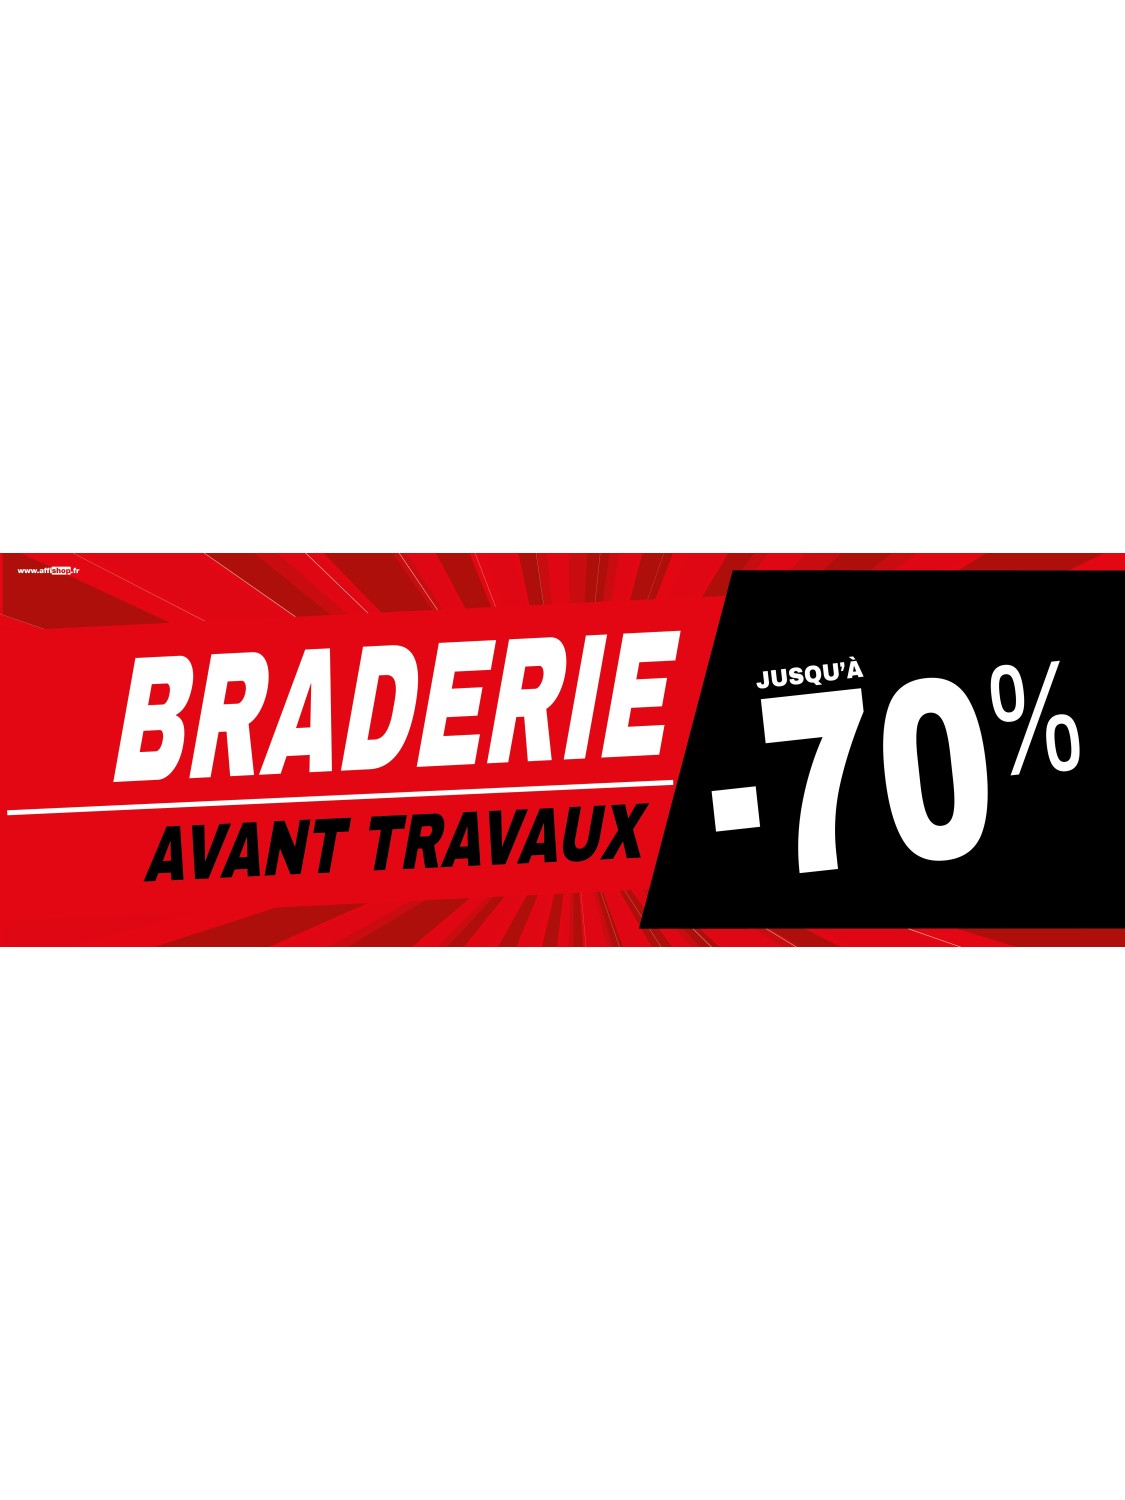 Banderole braderie personnalisable